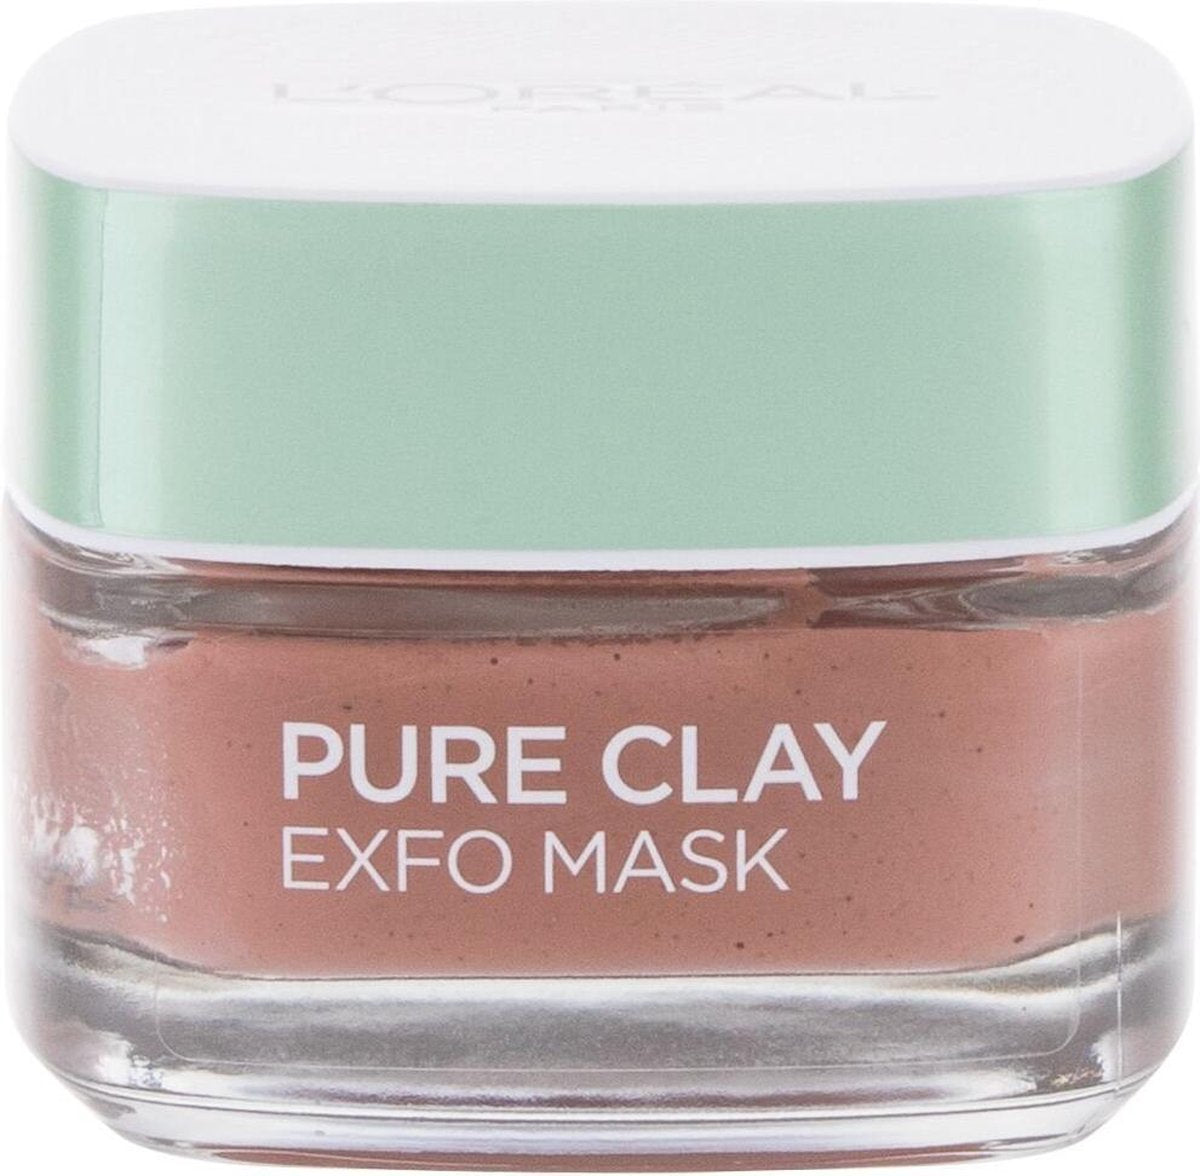 L'Oréal Pure Clay Exfo Mask - 50 | L'Oréal Paris | and skin care - We Are Eves: honest cosmetic reviews.